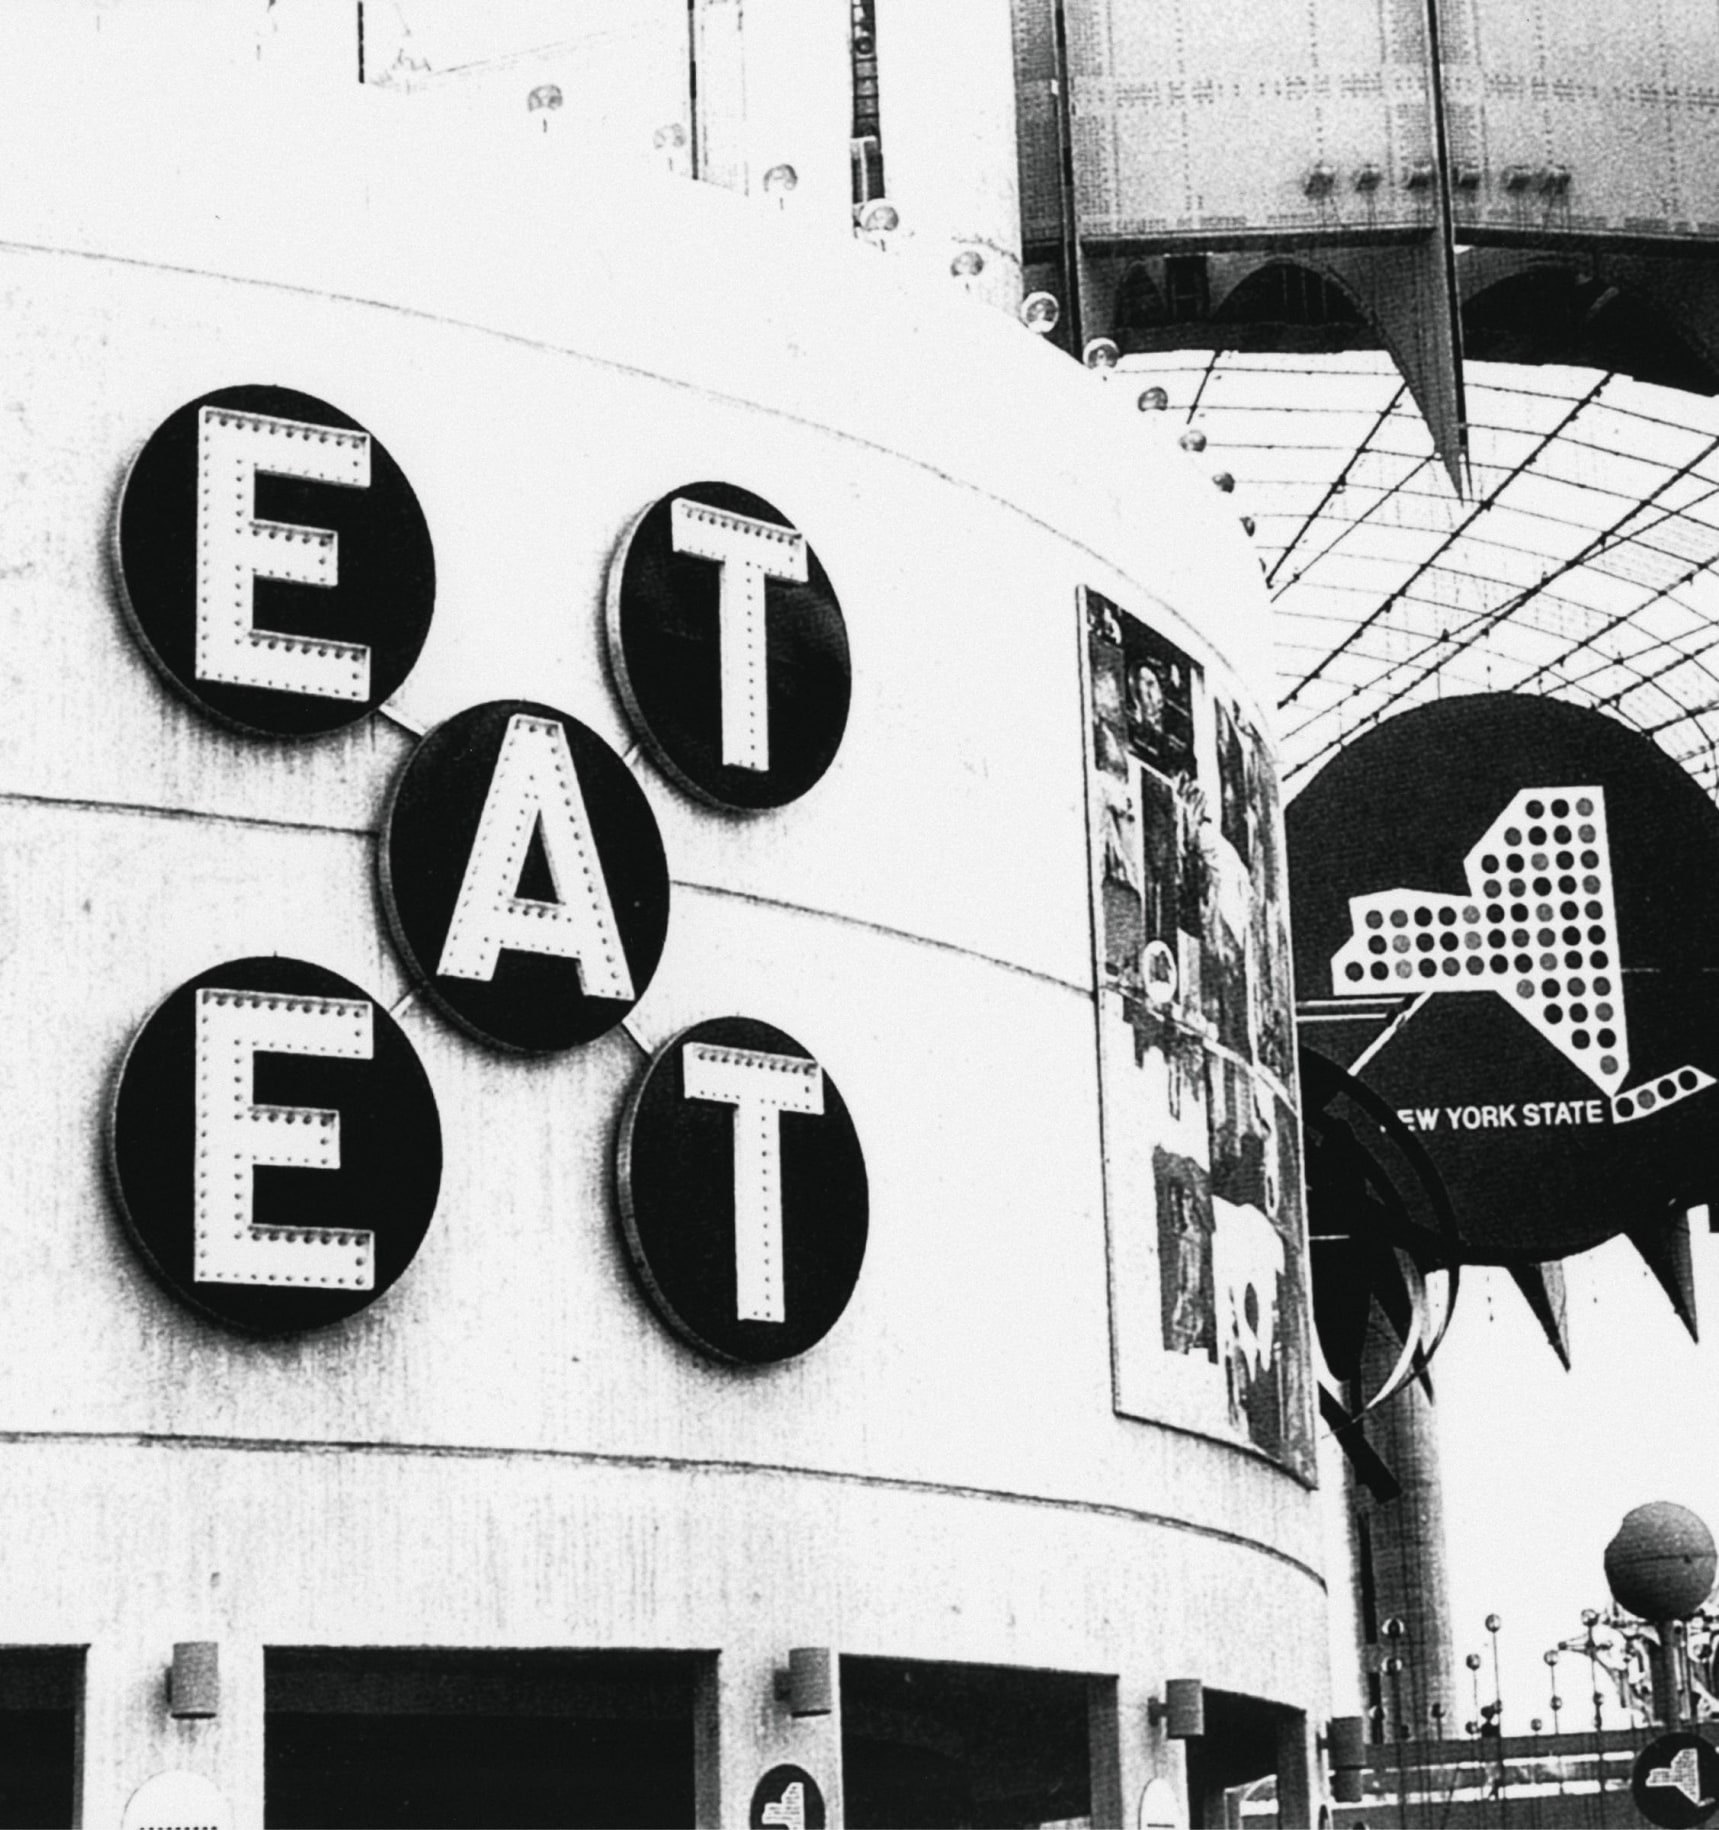 Indiana&#039;s&nbsp;EAT (1964) at the New York World&#039;s Fair, which opened on April 22, 1964